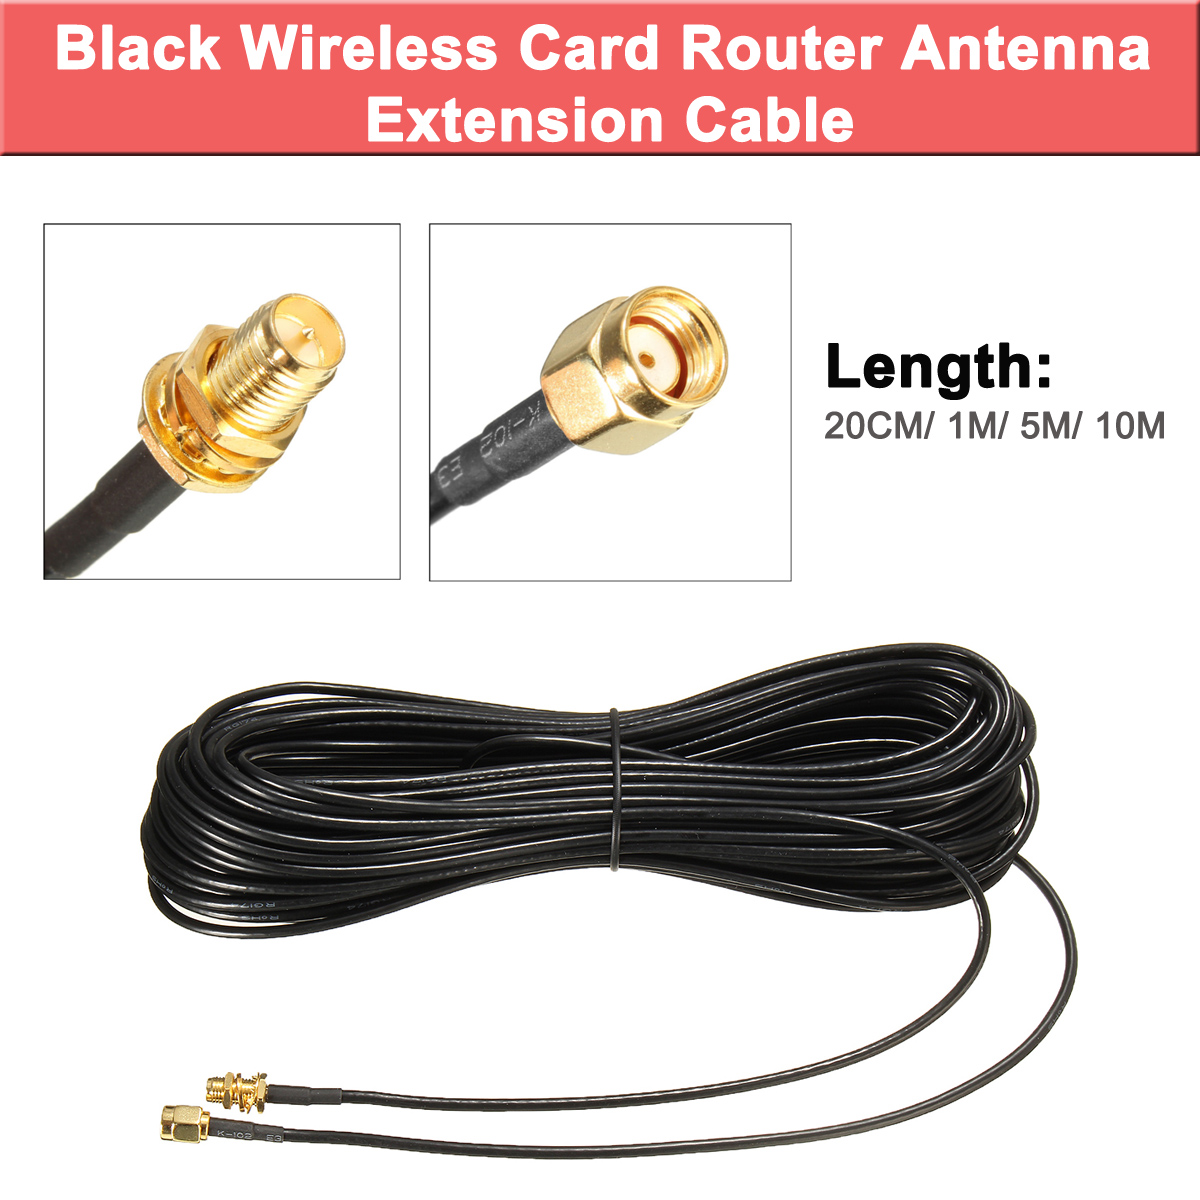 20CM/ 1M/ 5M/ 10M RP-SMA Male to Female Wireless Antenna Extension Cable 17